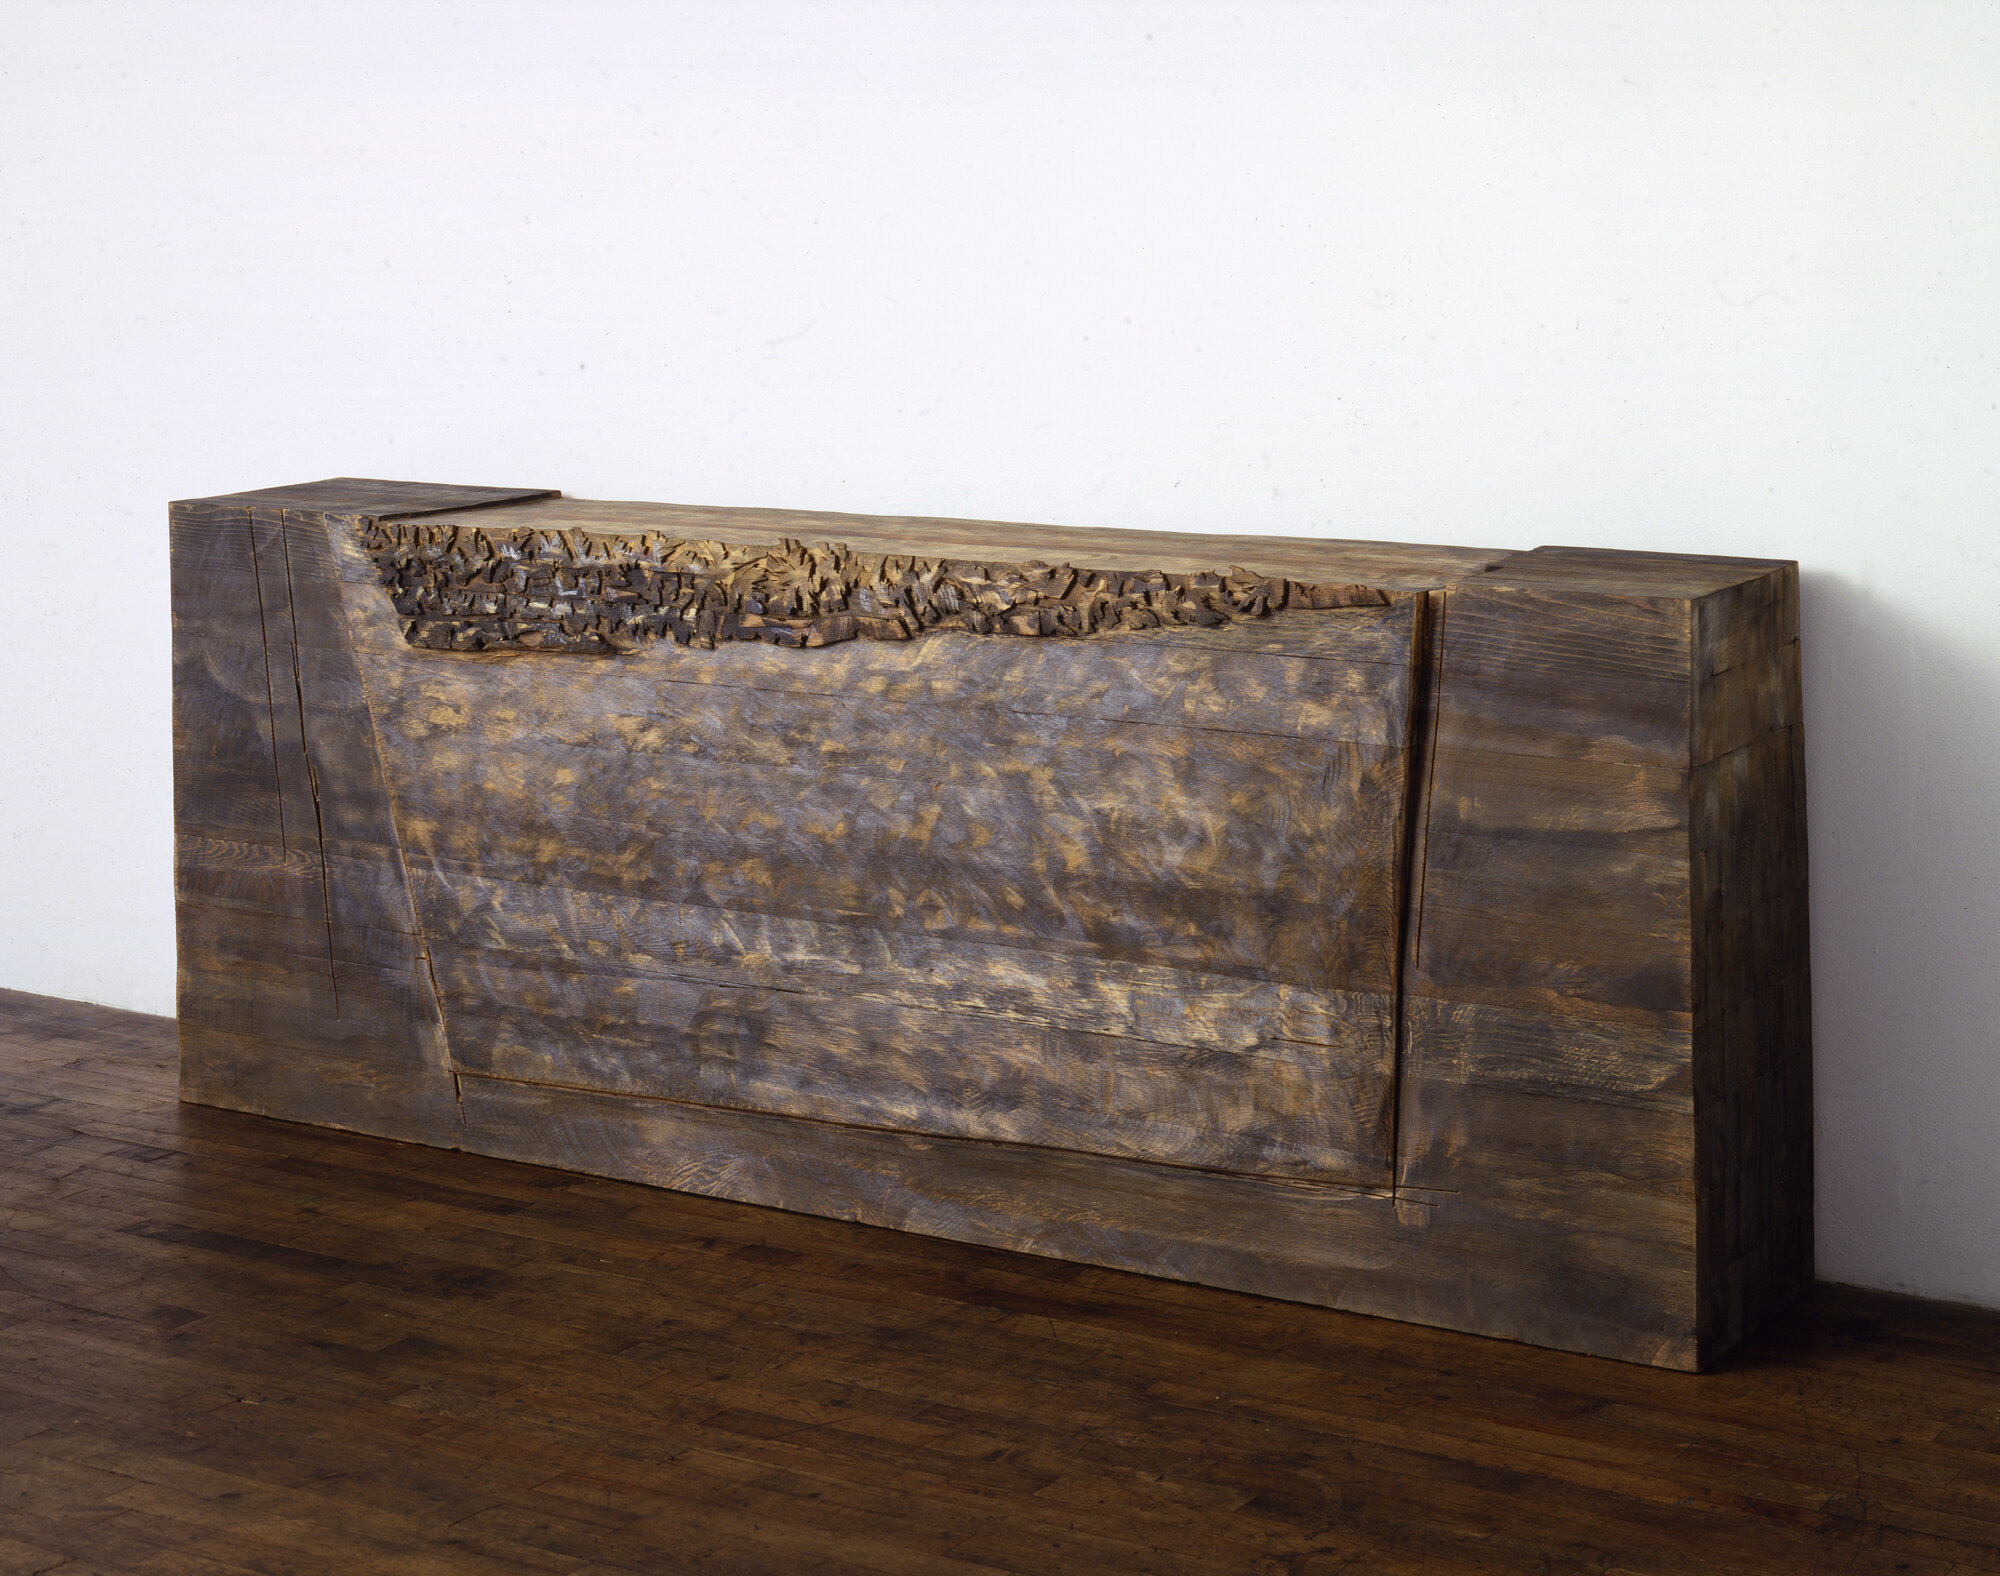       Table at Three PM , 1989 Cedar, stain, and graphite 24 x 84 x 12 in. 